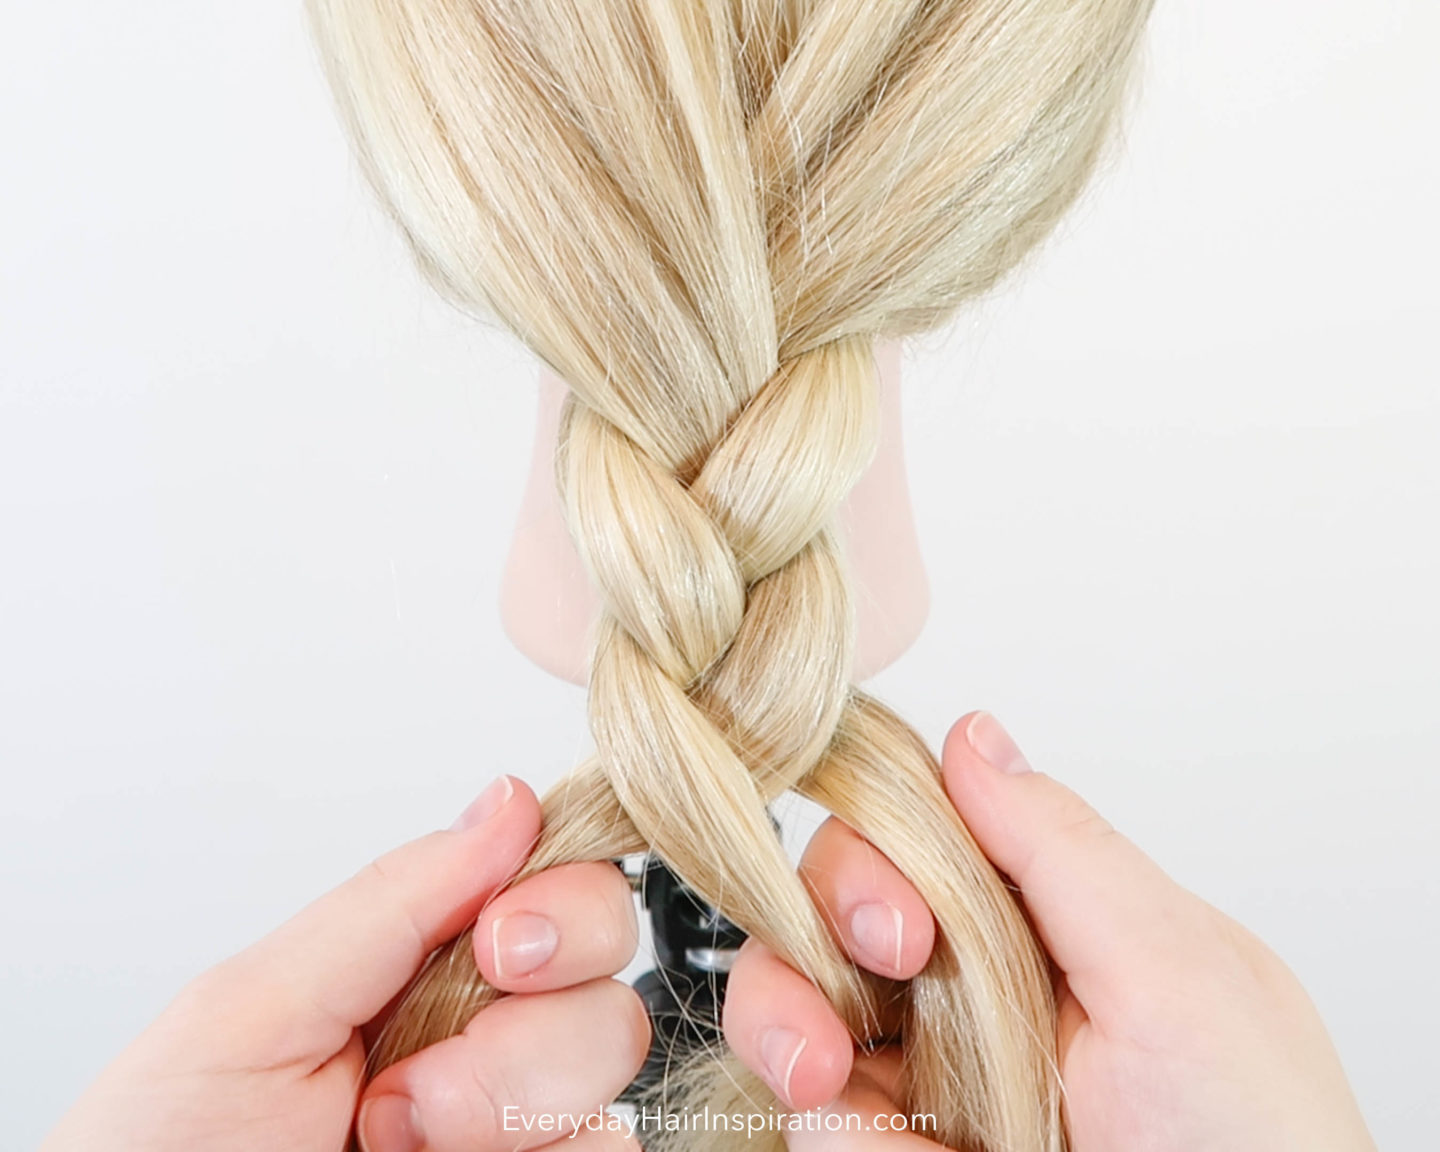 Blonde hairdresser doll with a basic braid getting braided in the hair.